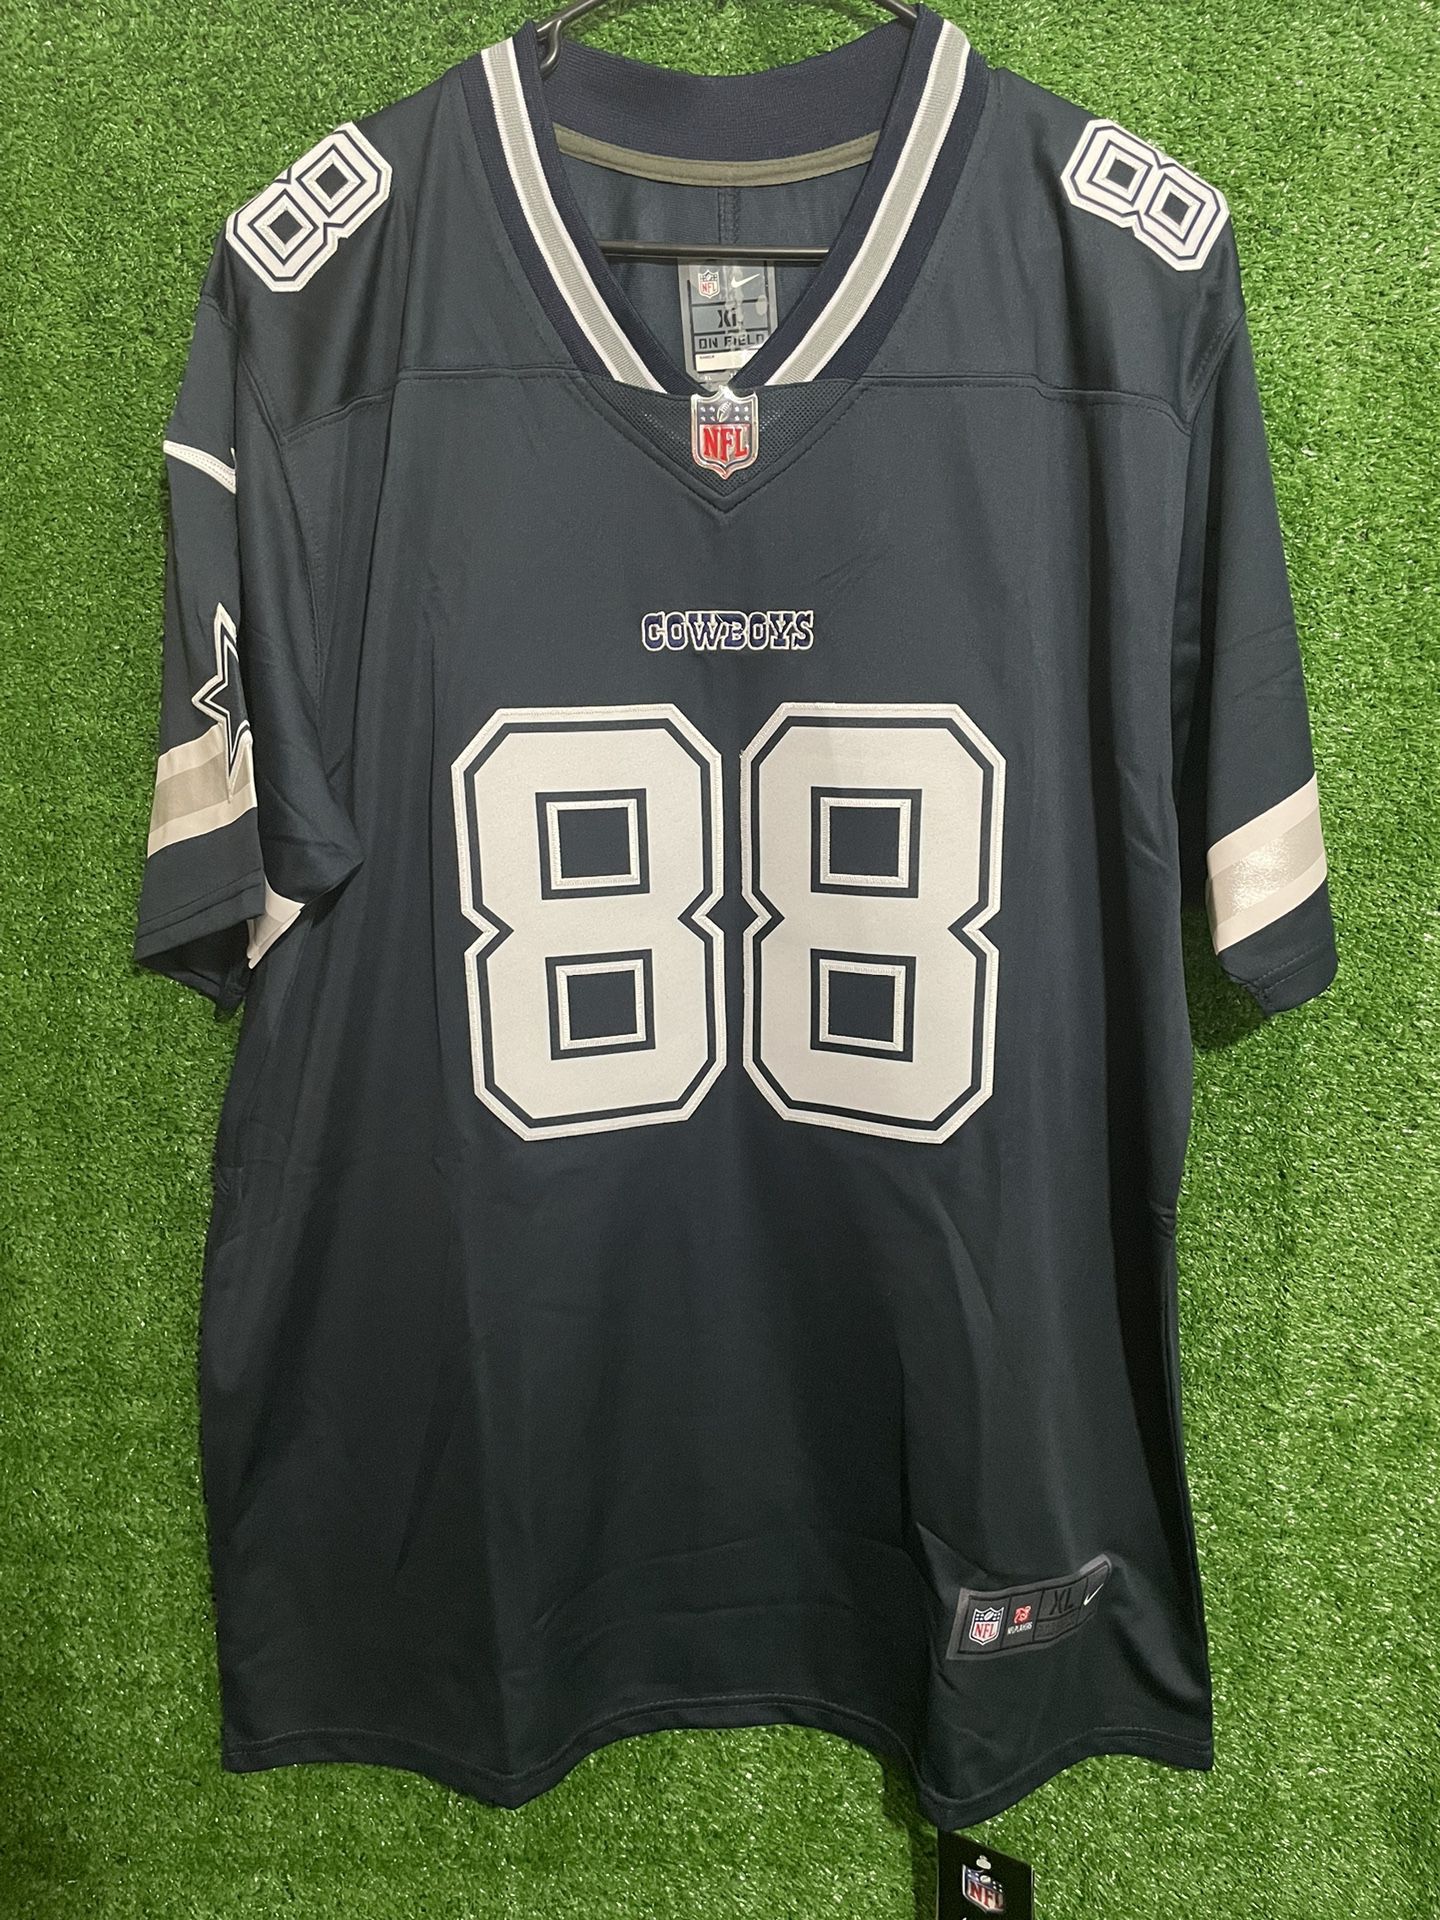 CEEDEE LAMB DALLAS COWBOYS NIKE JERSEY BRAND NEW WITH TAGS SIZES MEDIUM, LARGE AND XL AVAILABLE